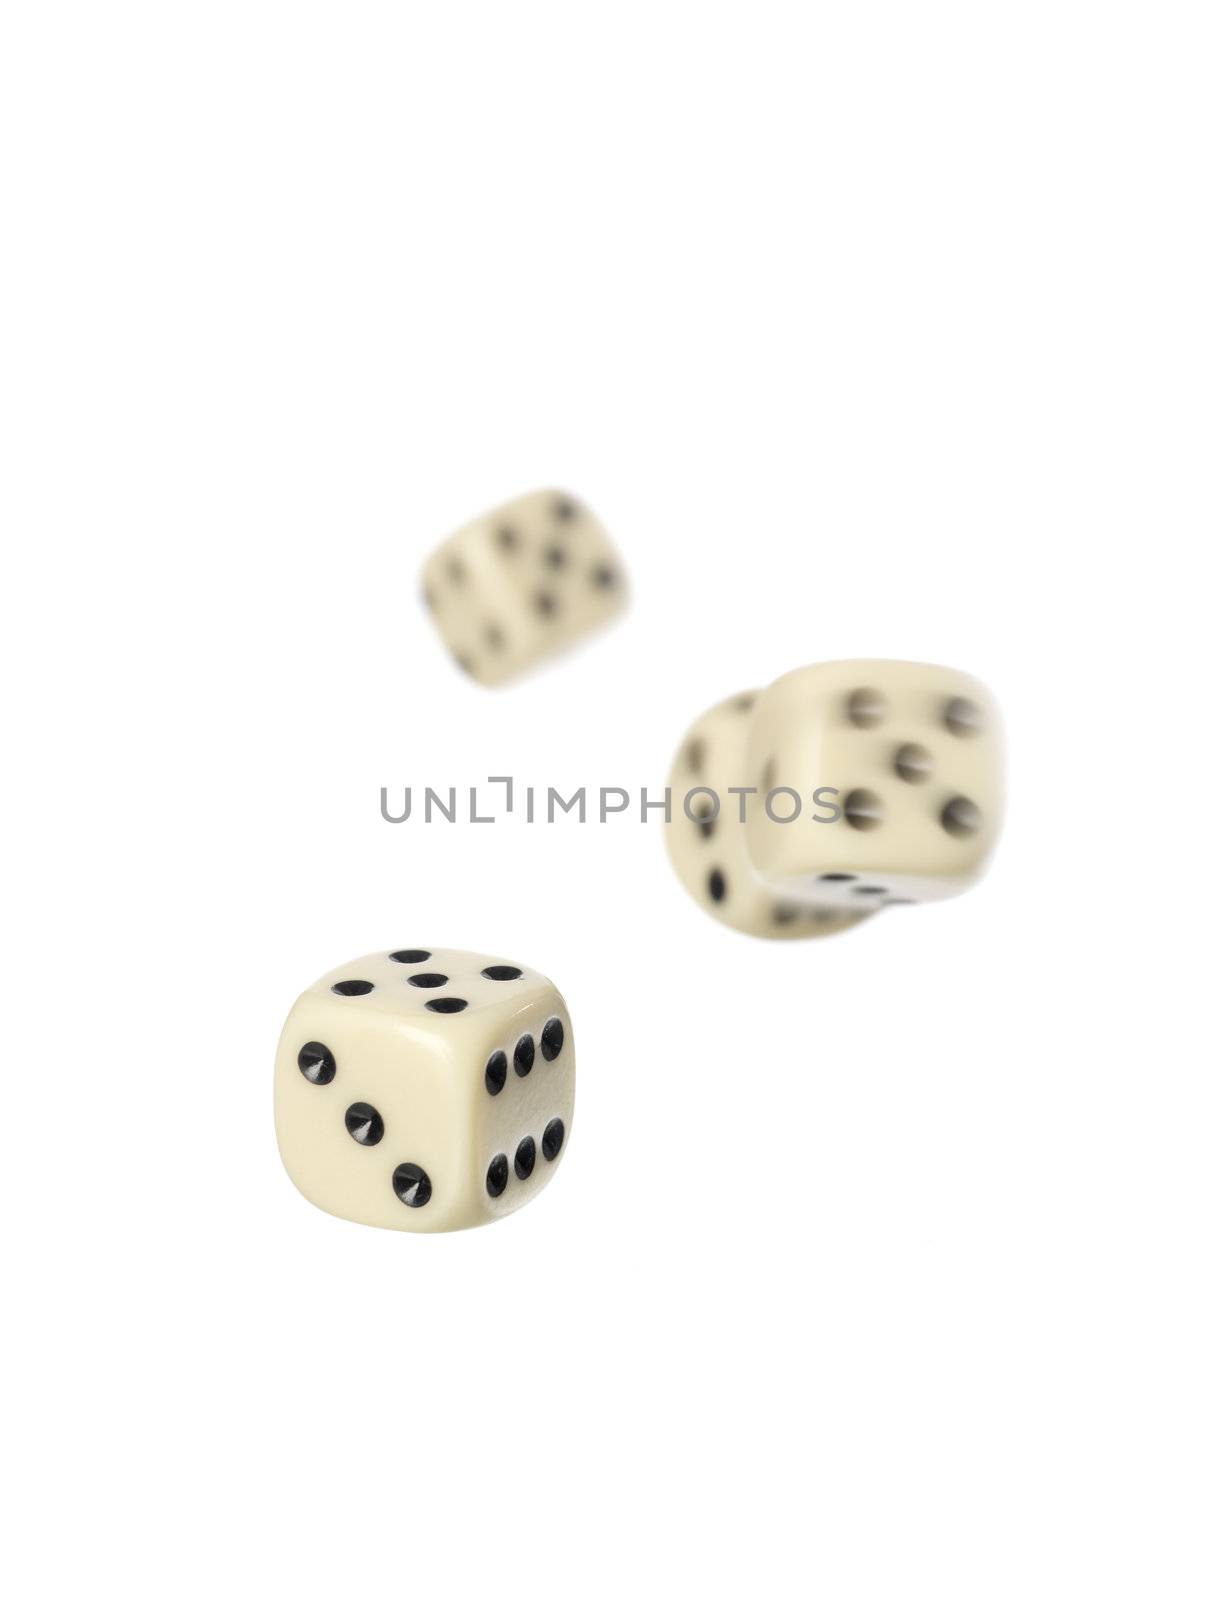 Roled dices by gemenacom